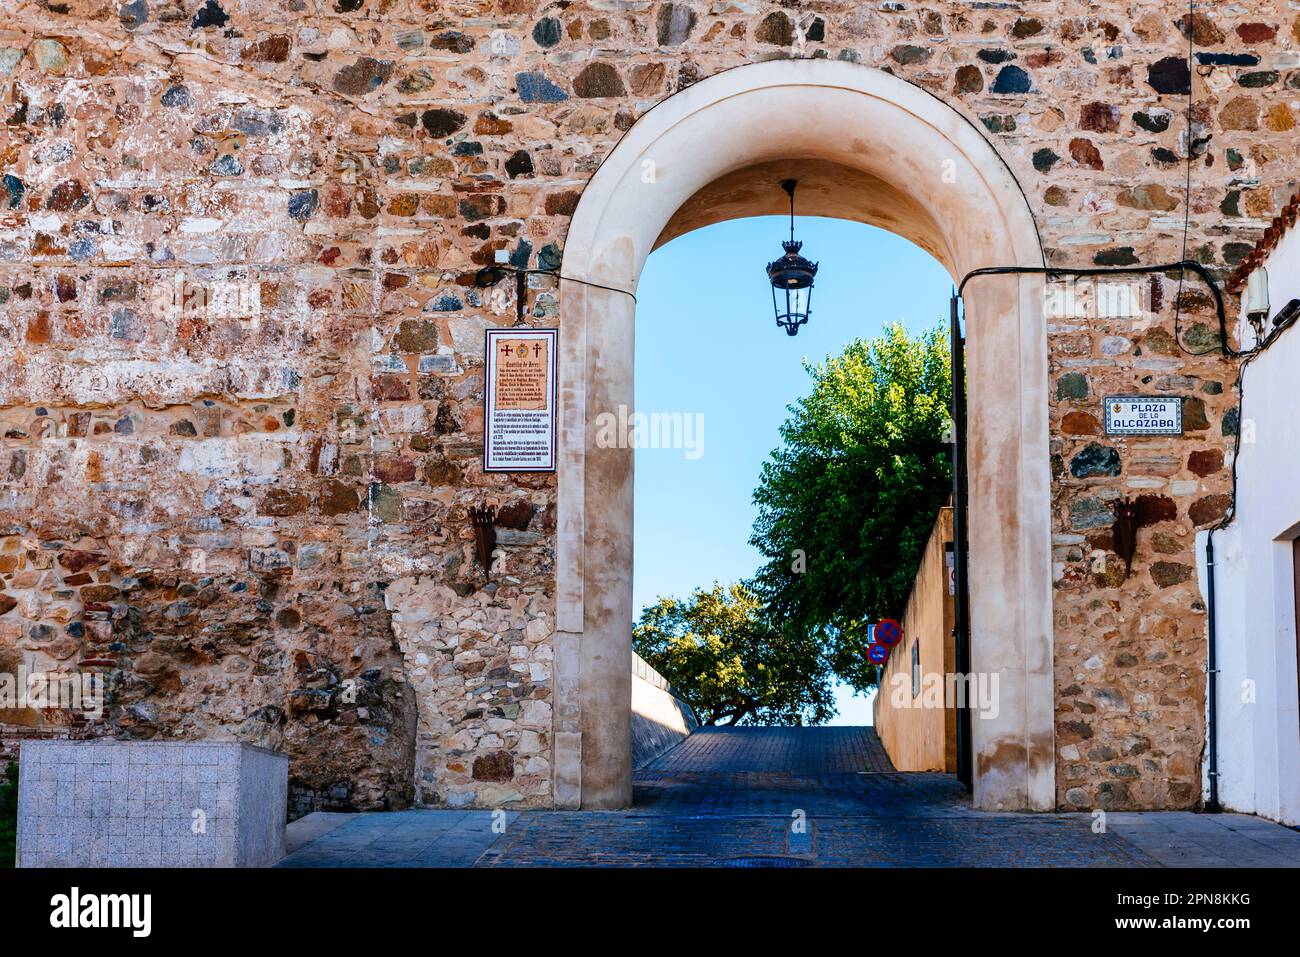 Gate of the village. One of the two entrances to the walled enclosure of the castle of Jerez de los Caballeros, , Badajoz, Extremadura, Spain, Europe Stock Photo